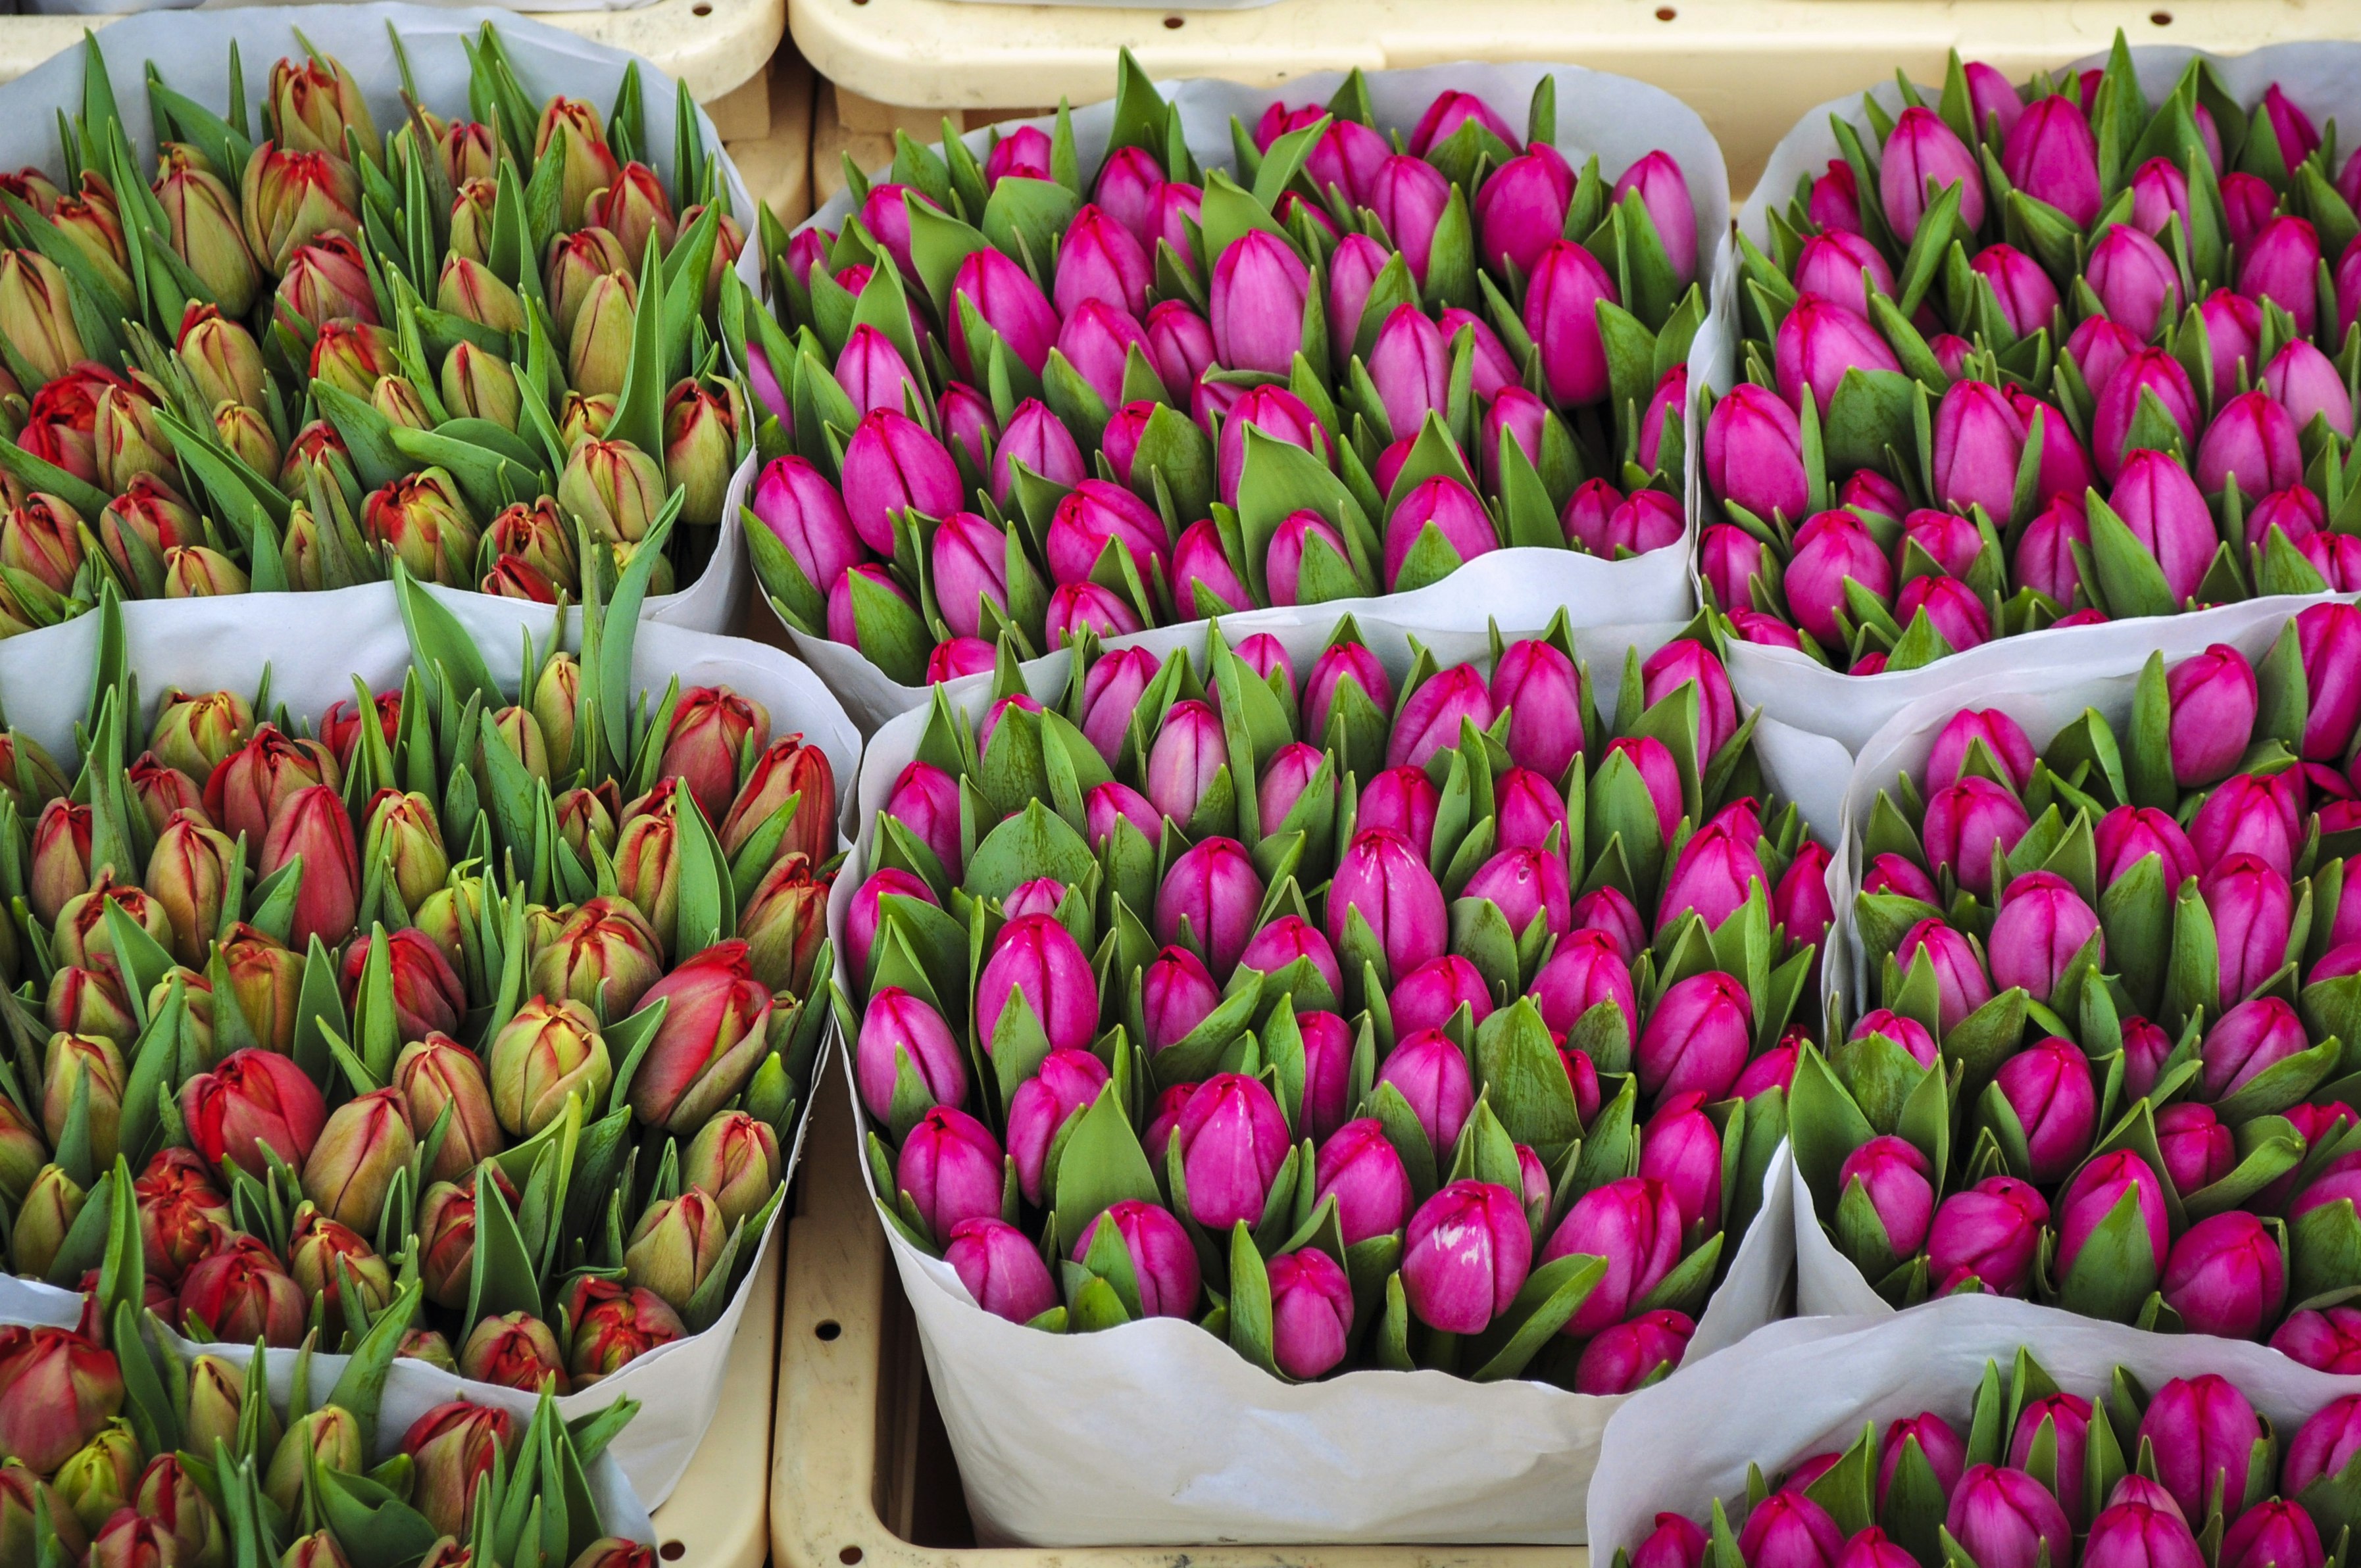 Colorful Tulips for sale in Amsterdam